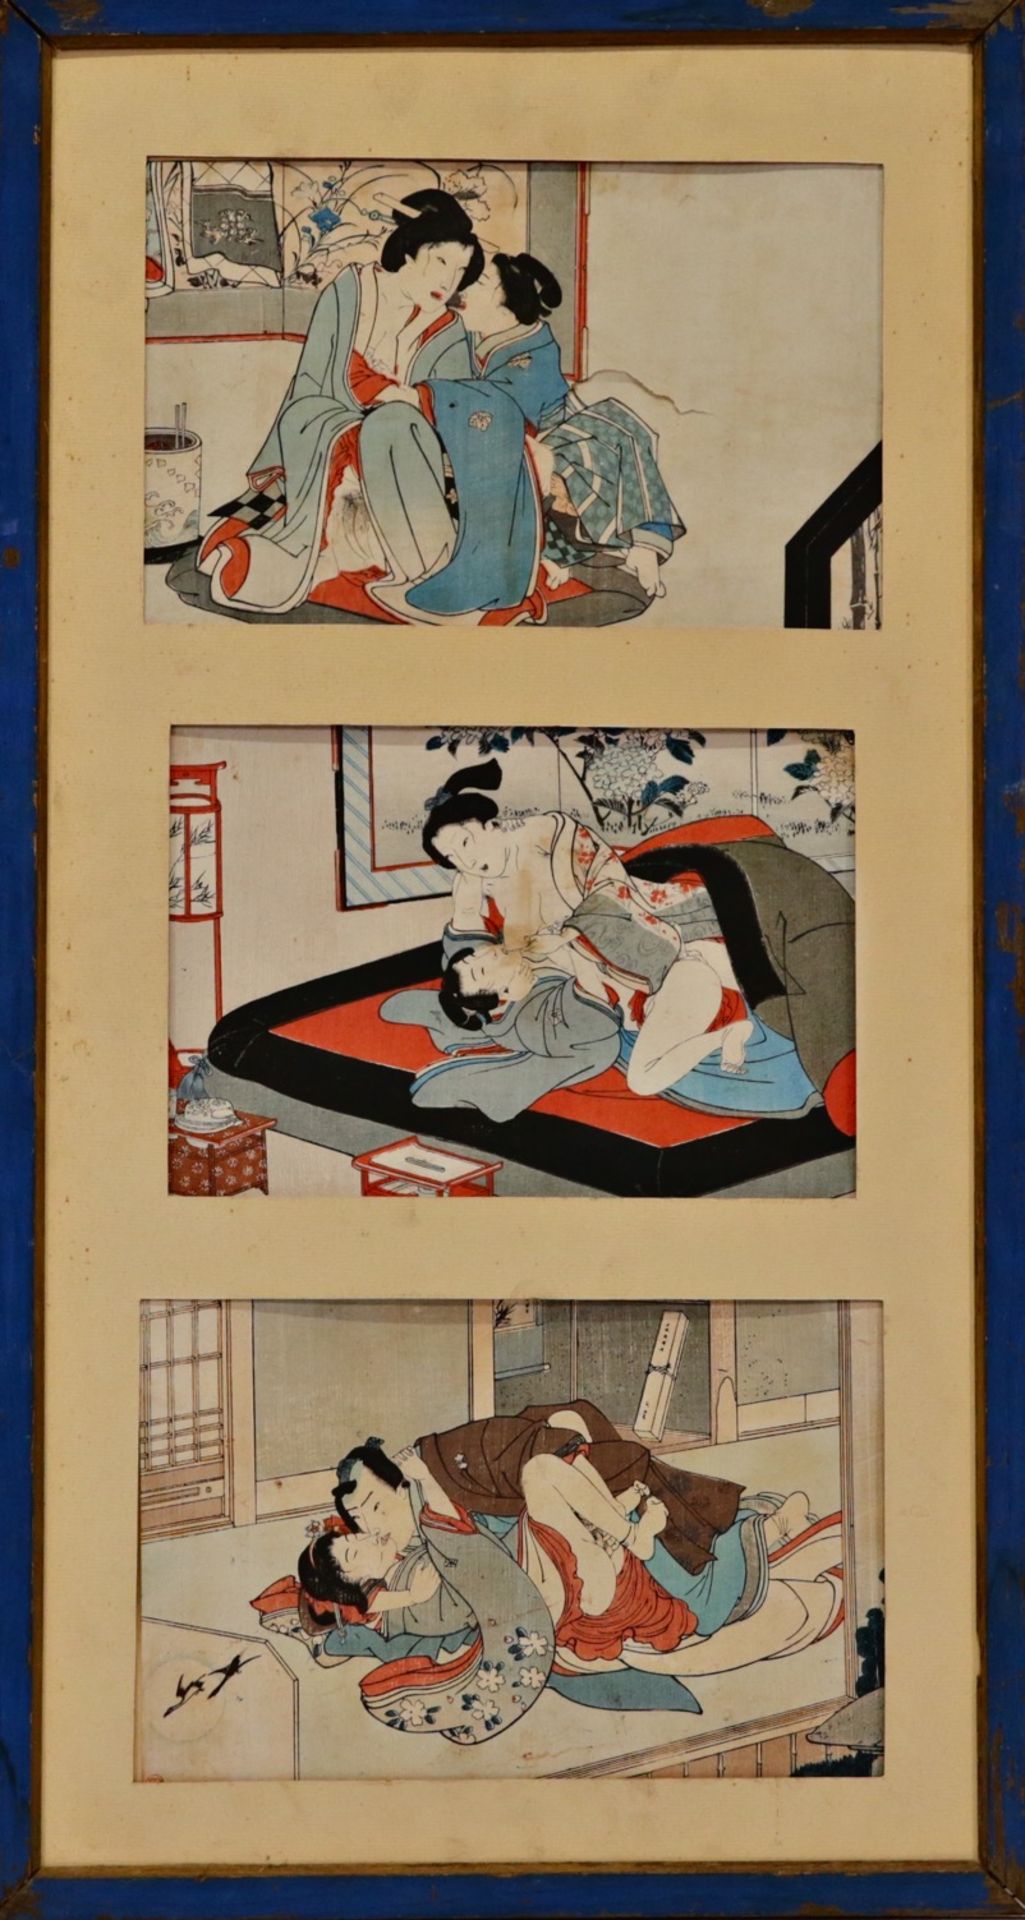 Three Antique Original Japanese Erotic Prints, 19th _. Japanese art, Collectible art for home decor. - Image 2 of 4